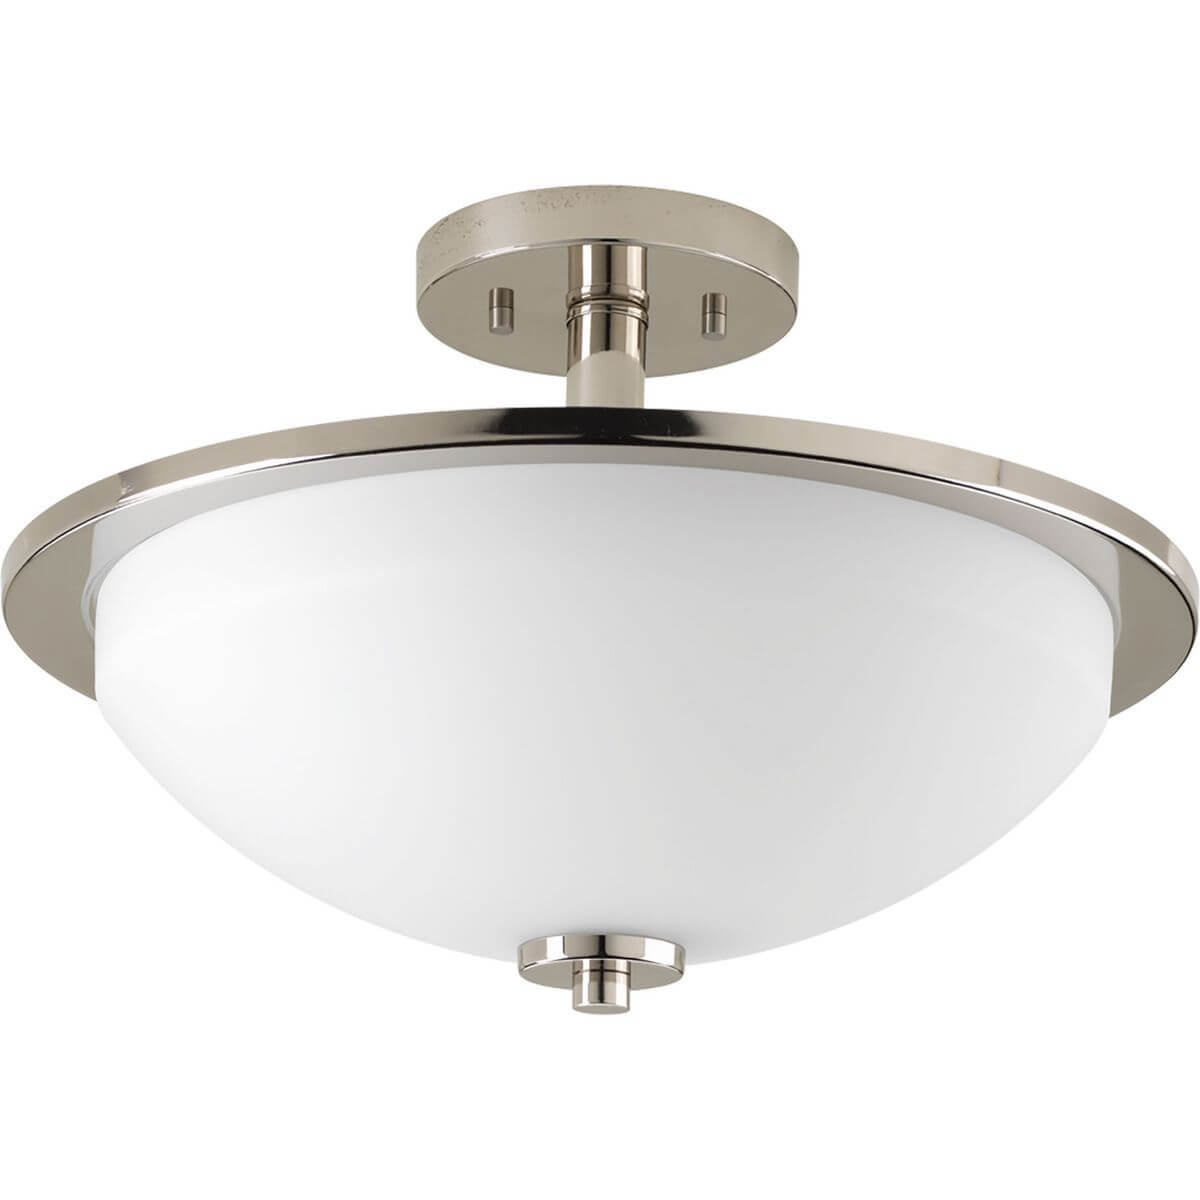 Progress Lighting Replay 2 Light 15 inch Semi-Flush Mount in Polished Nickel with Etched Outside and Painted White Inside Glass Bowl P3424-104